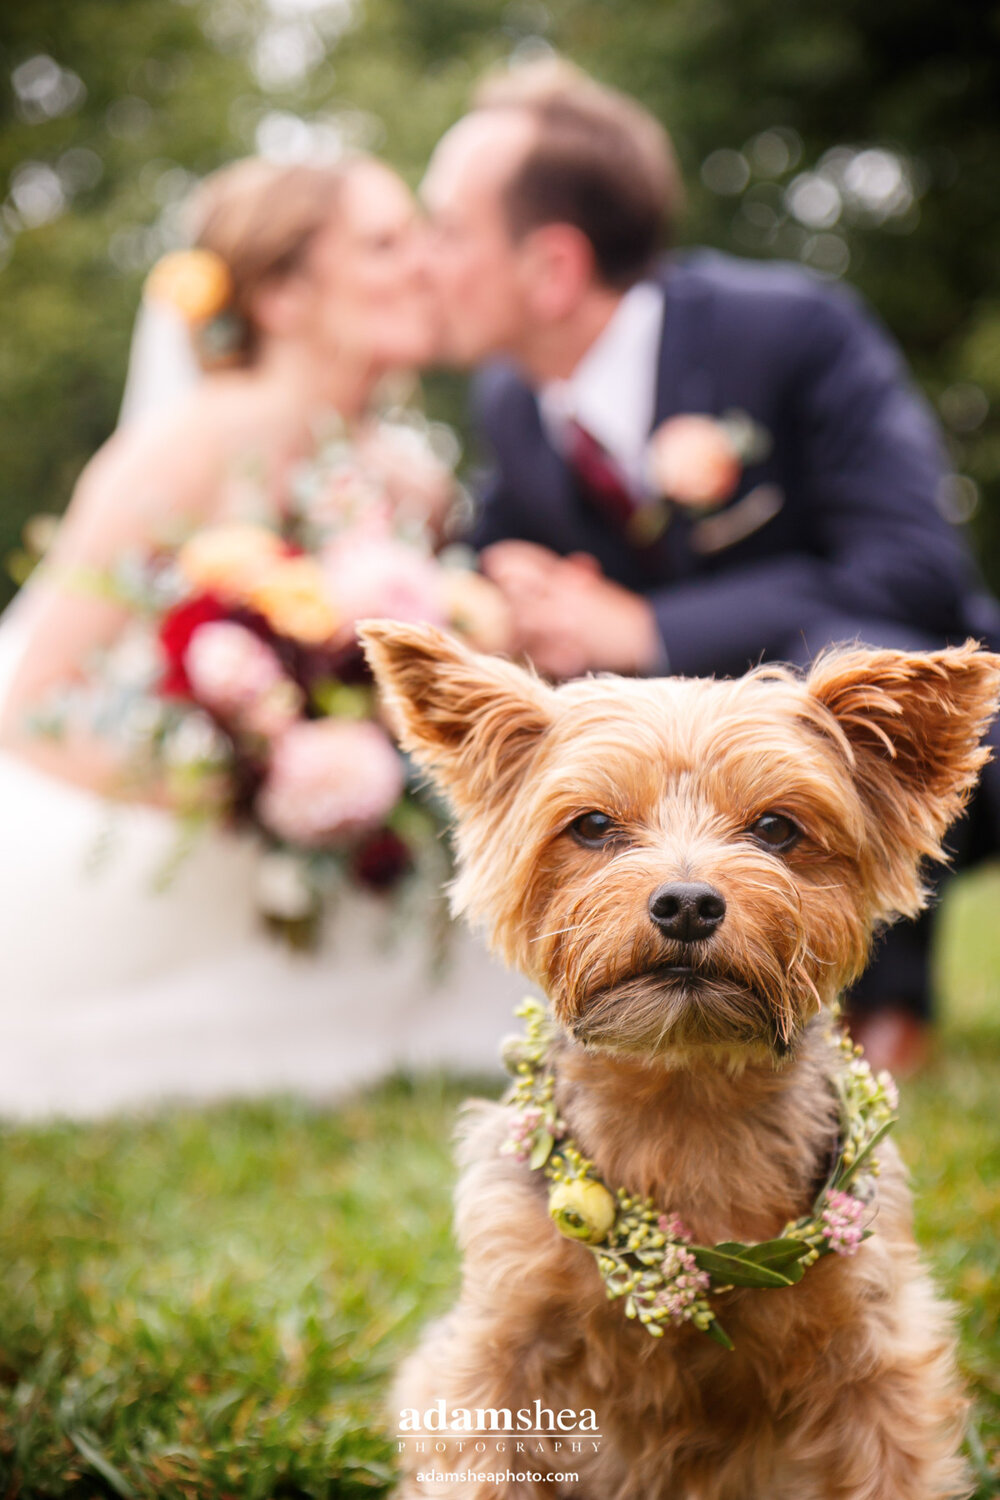 Gorgeous Wedding Fields at the Reserve - Stoughton WI - Adam Shea Photography - Bride and Groom With Pup